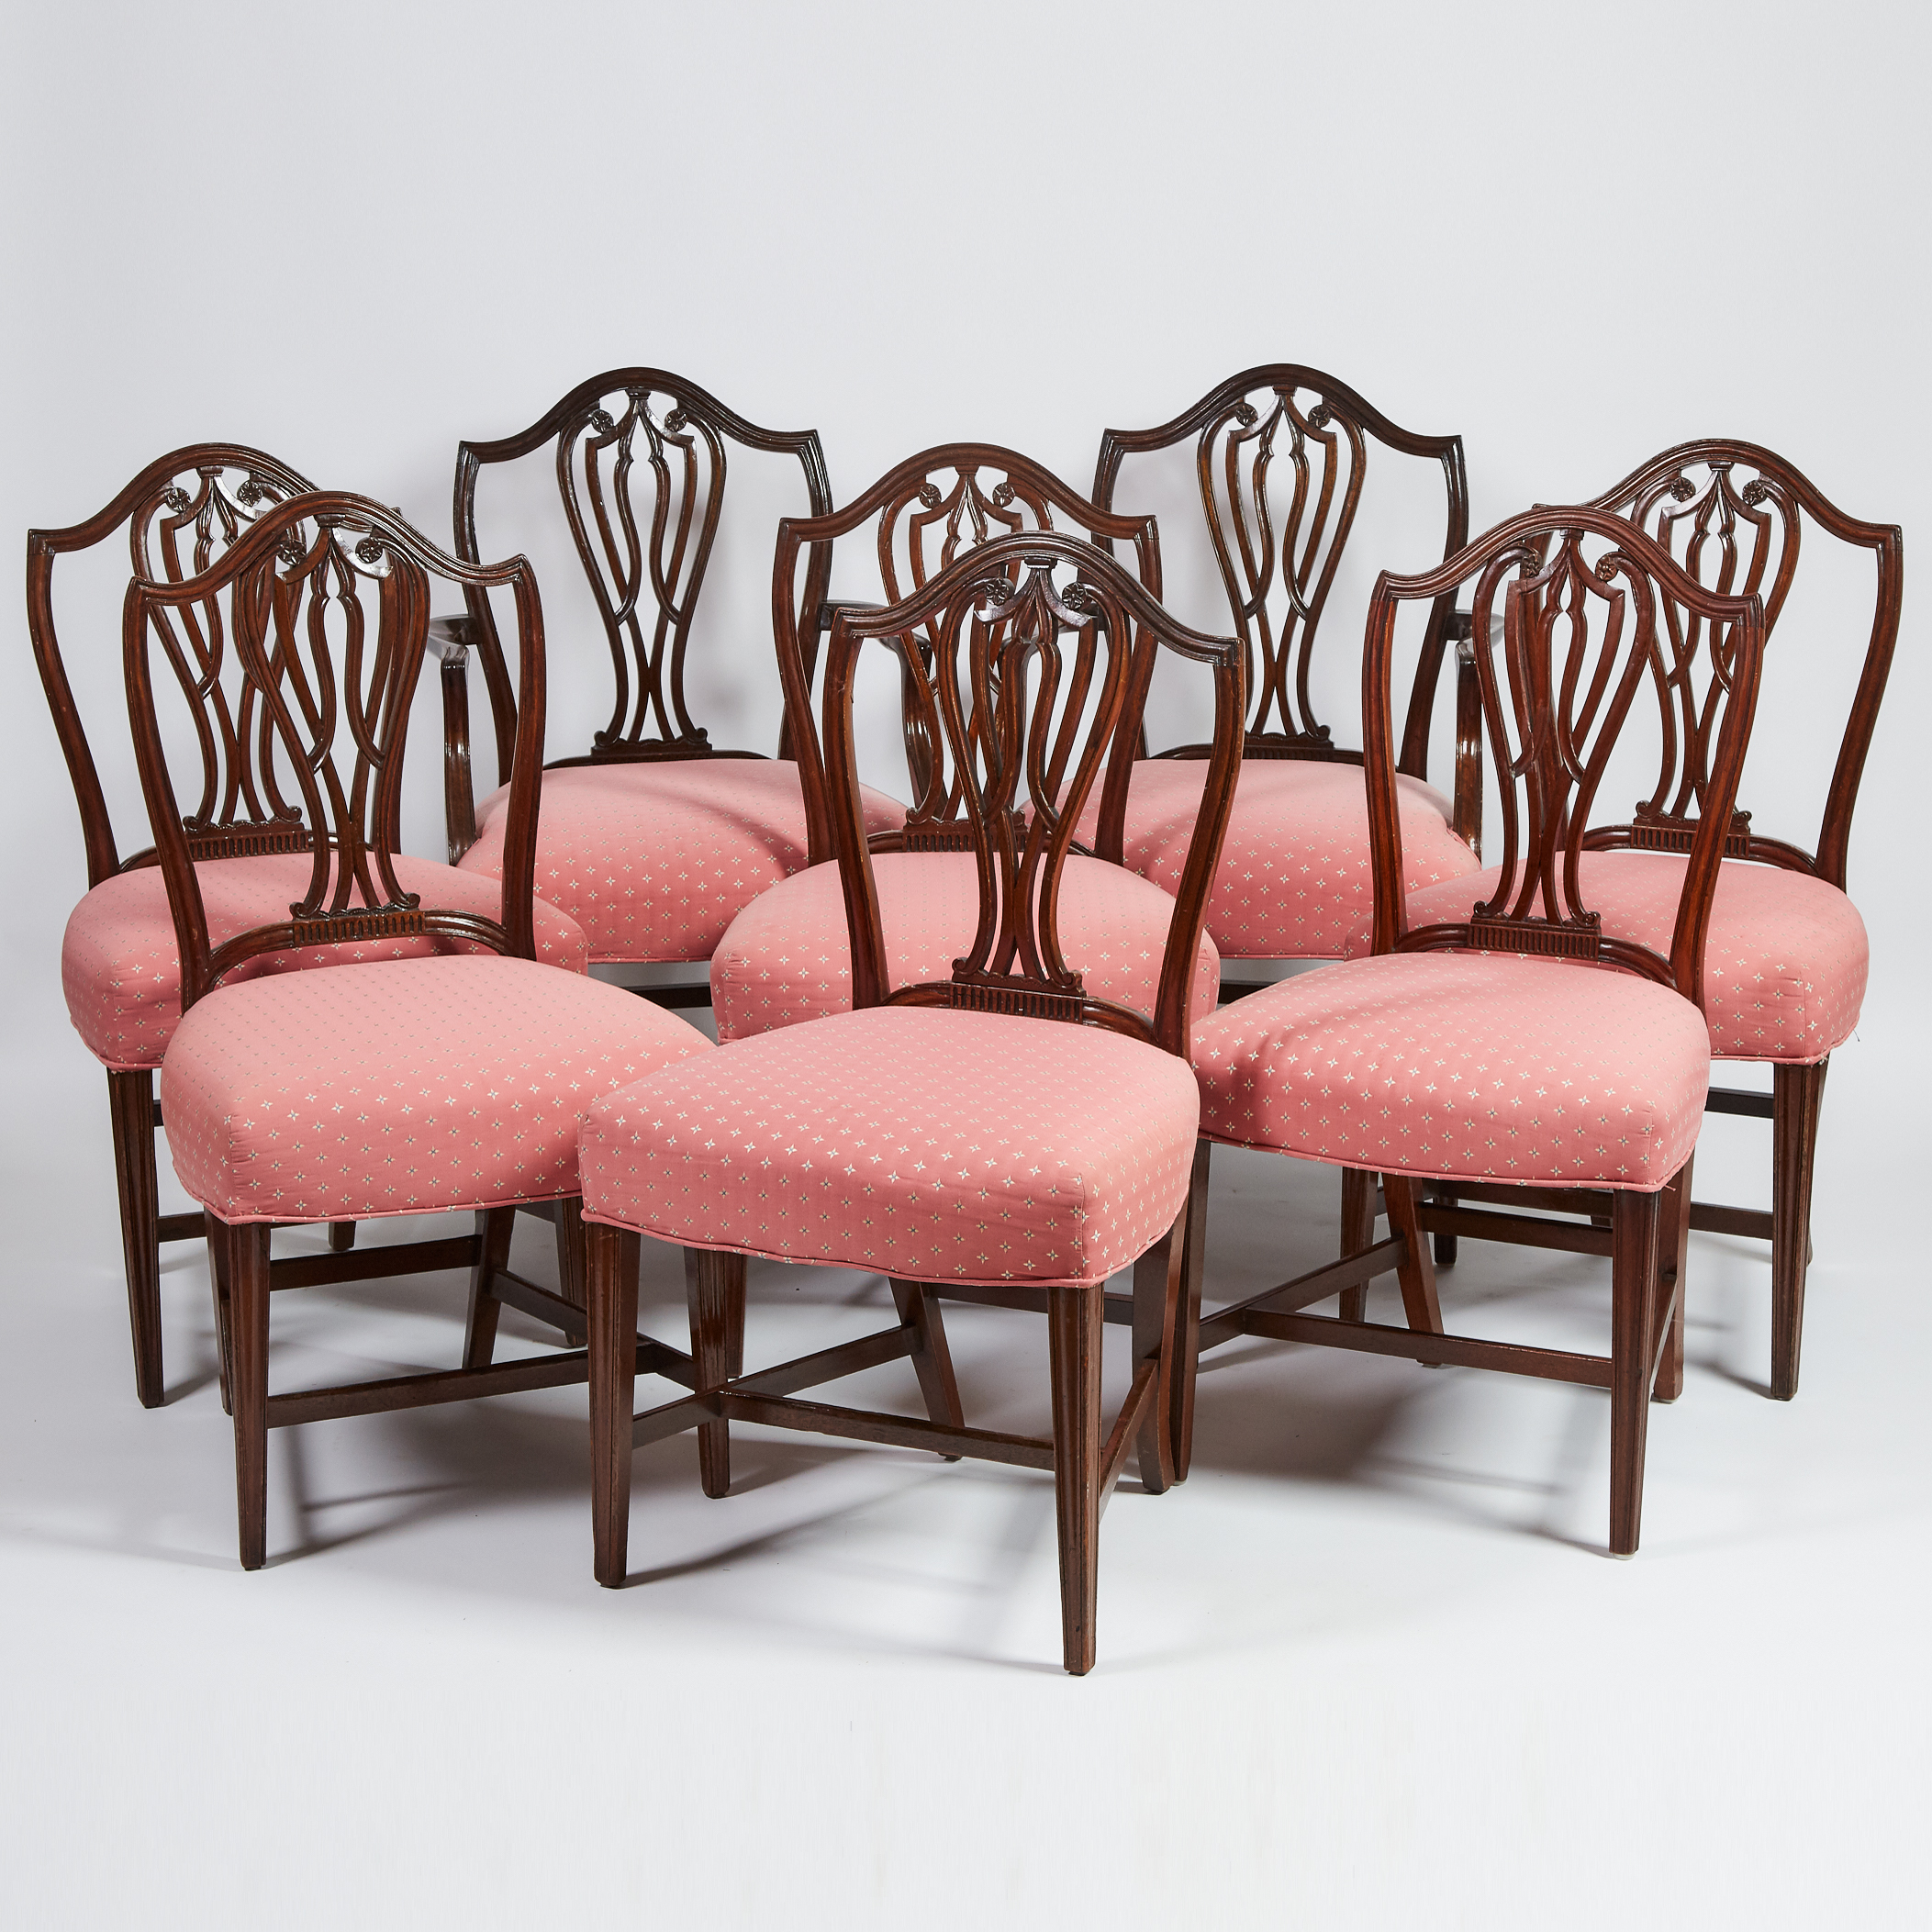 Set of Eight Hepplewhite Style Mahogany Shield Back Dining Chairs, early 20th century